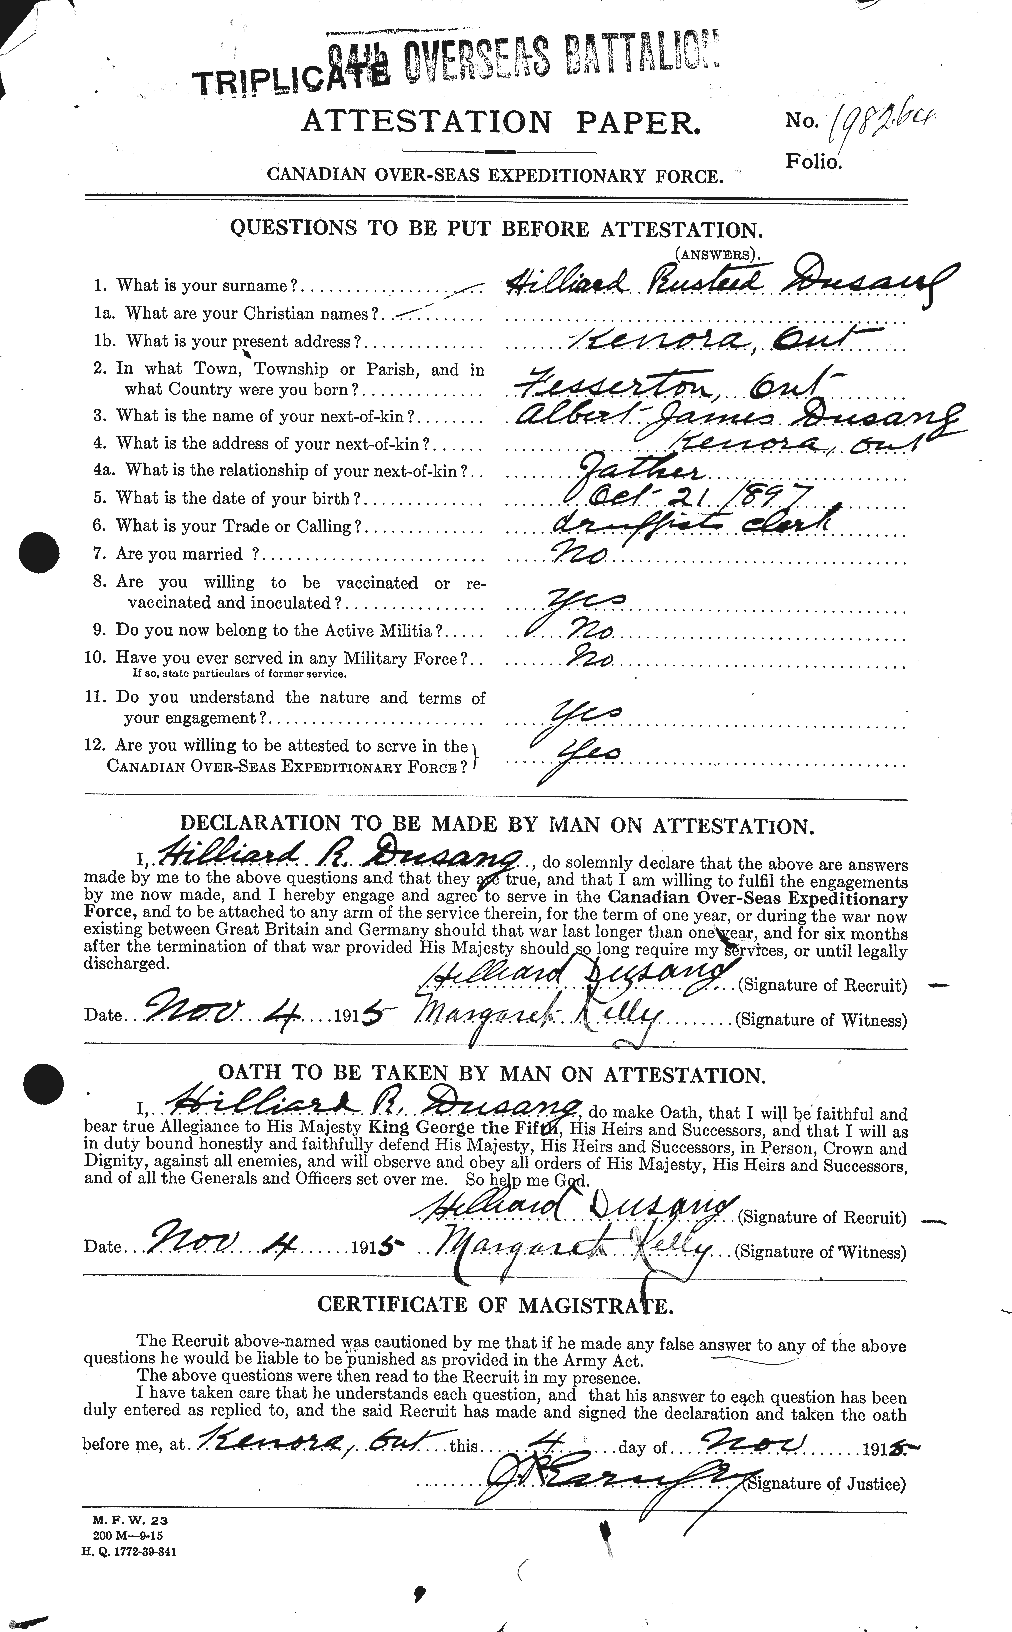 Personnel Records of the First World War - CEF 305466a